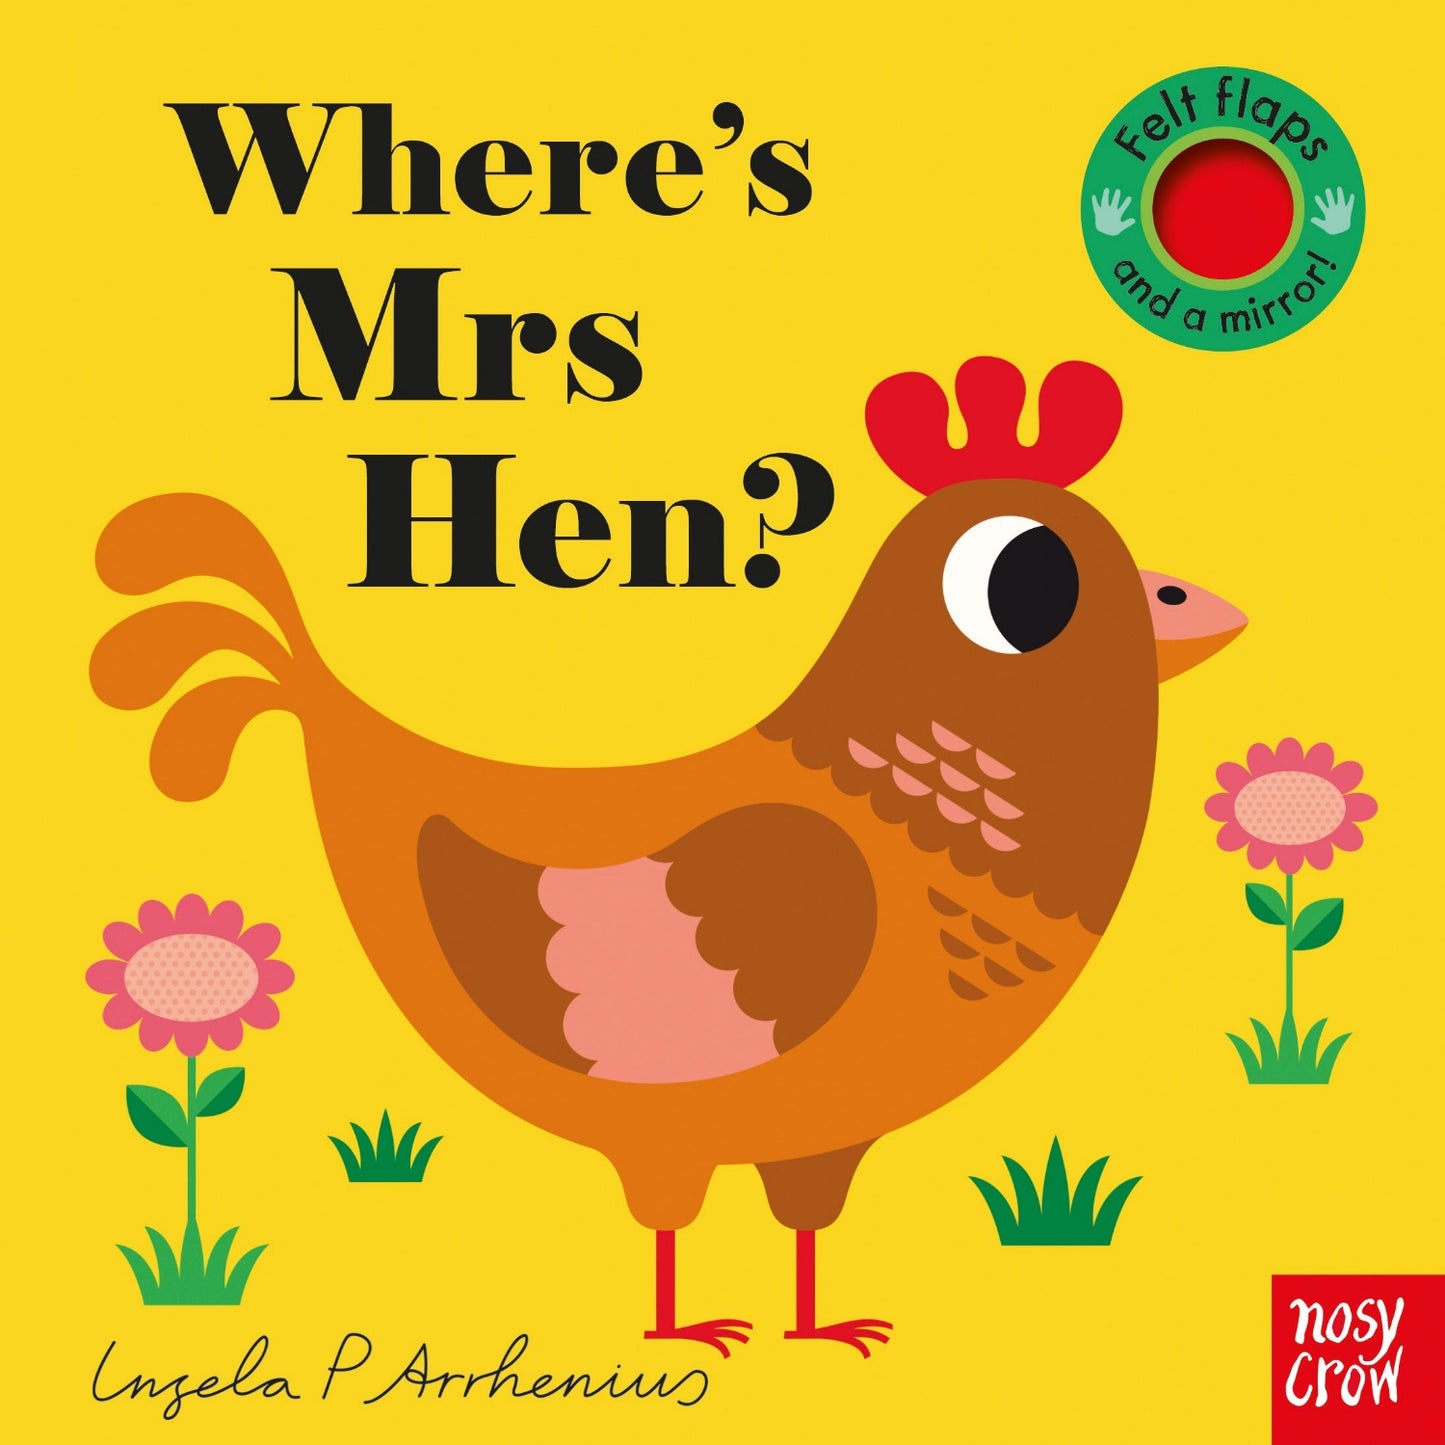 Where's Mrs Hen? | Felt Flaps Board Book for Babies & Toddlers